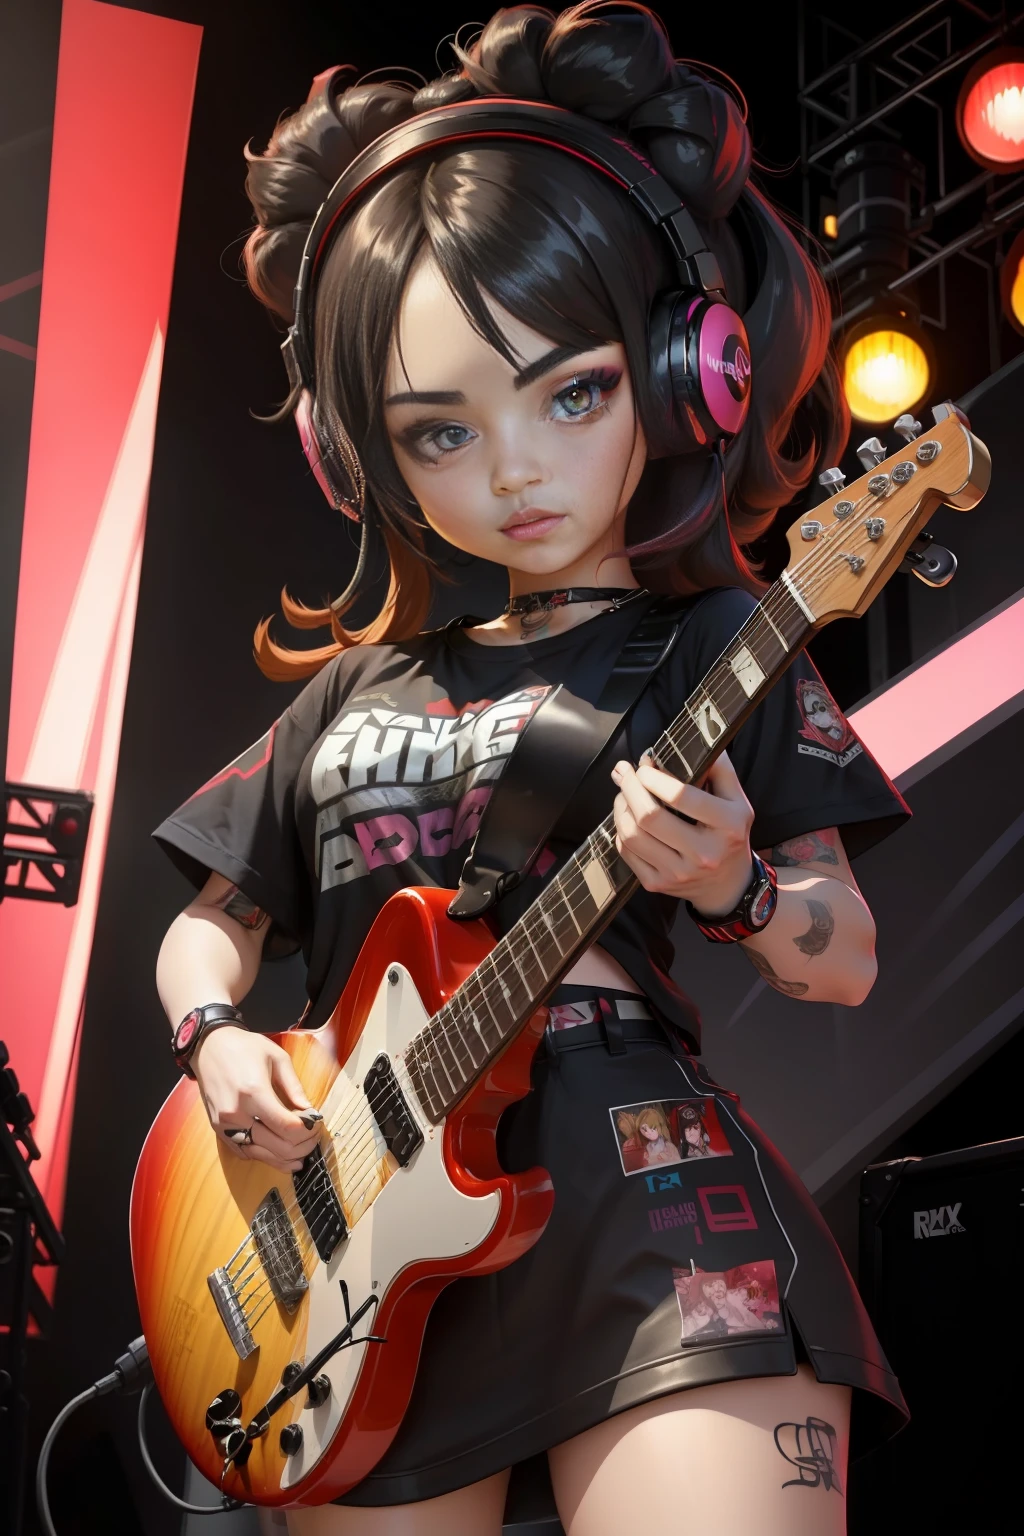 16k Ultra HD Vivid Colors Masterpiece Ultra Resolution Cinematic Digital Art, Chibi Style, A 20 Year Old Big Head Girl, Big Black Eyes, Black Hair, Light Brown Eyes, Rock Clothes, Tattoo on Her Arm, Standing Playing Colorful Electric Guitar, Effect Out of Guitar, She's on top of a stage, with gamer headphones. Vivid colors, vibrant colors, spicy colors, cinematic RAW light best ultra HD quality.